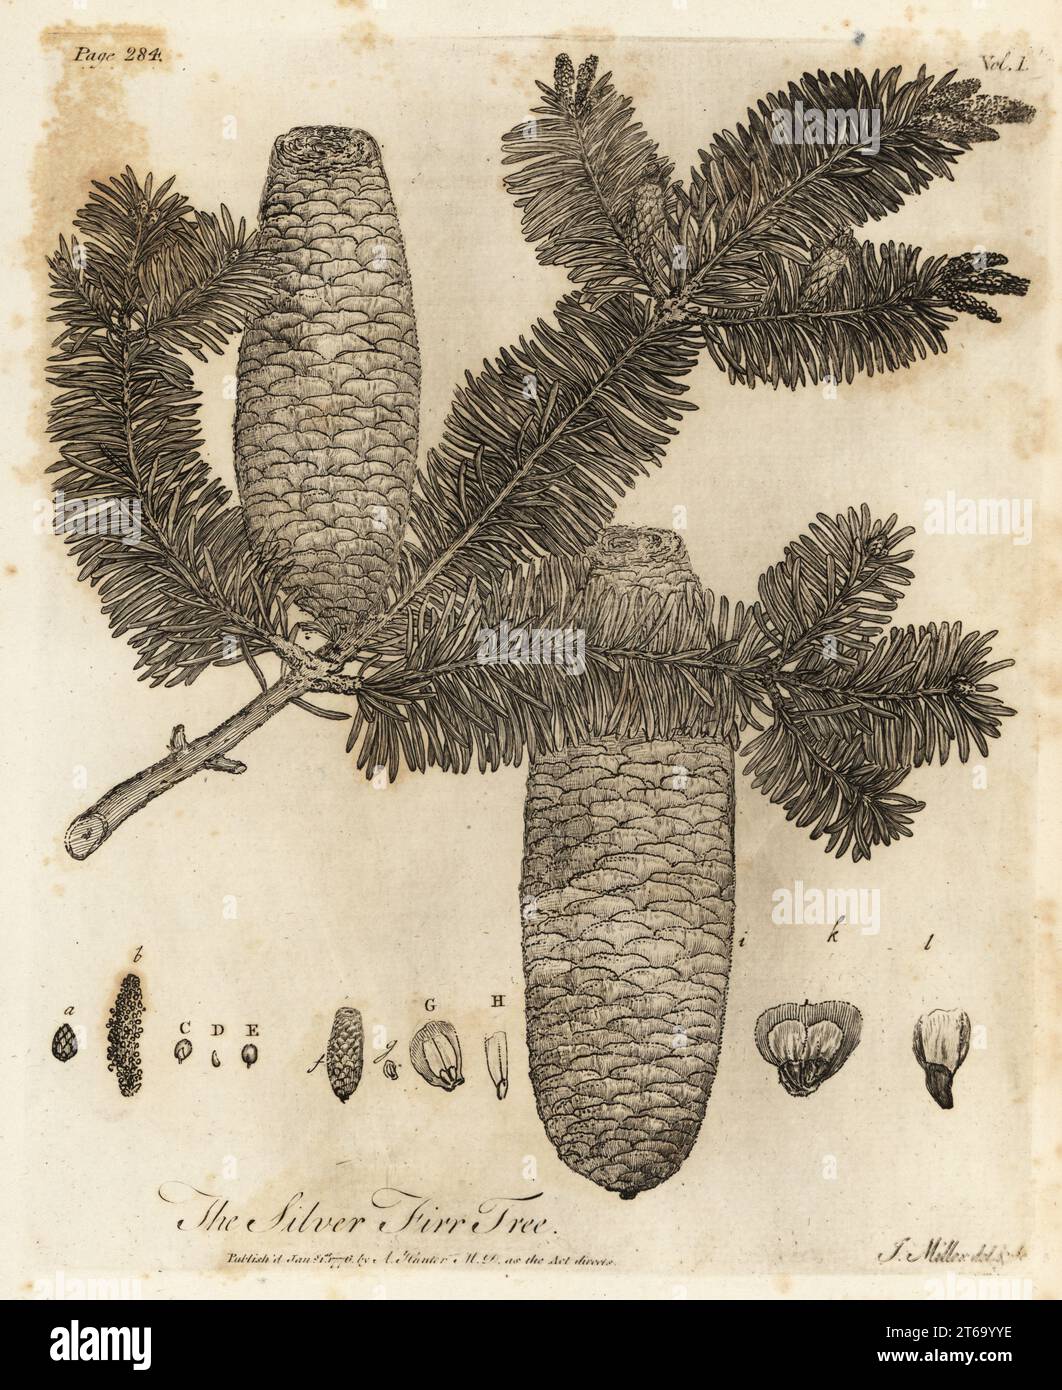 European silver fir, Abies alba. Silver Fir Tree, Pinus picea. Copperplate engraving drawn and engraved by John Miller (Johann Sebastian Muller) from John Evelyns Sylva, or A Discourse of Forest Trees and the Propagation of Timer, J. Dodsley, London, 1776. Stock Photo